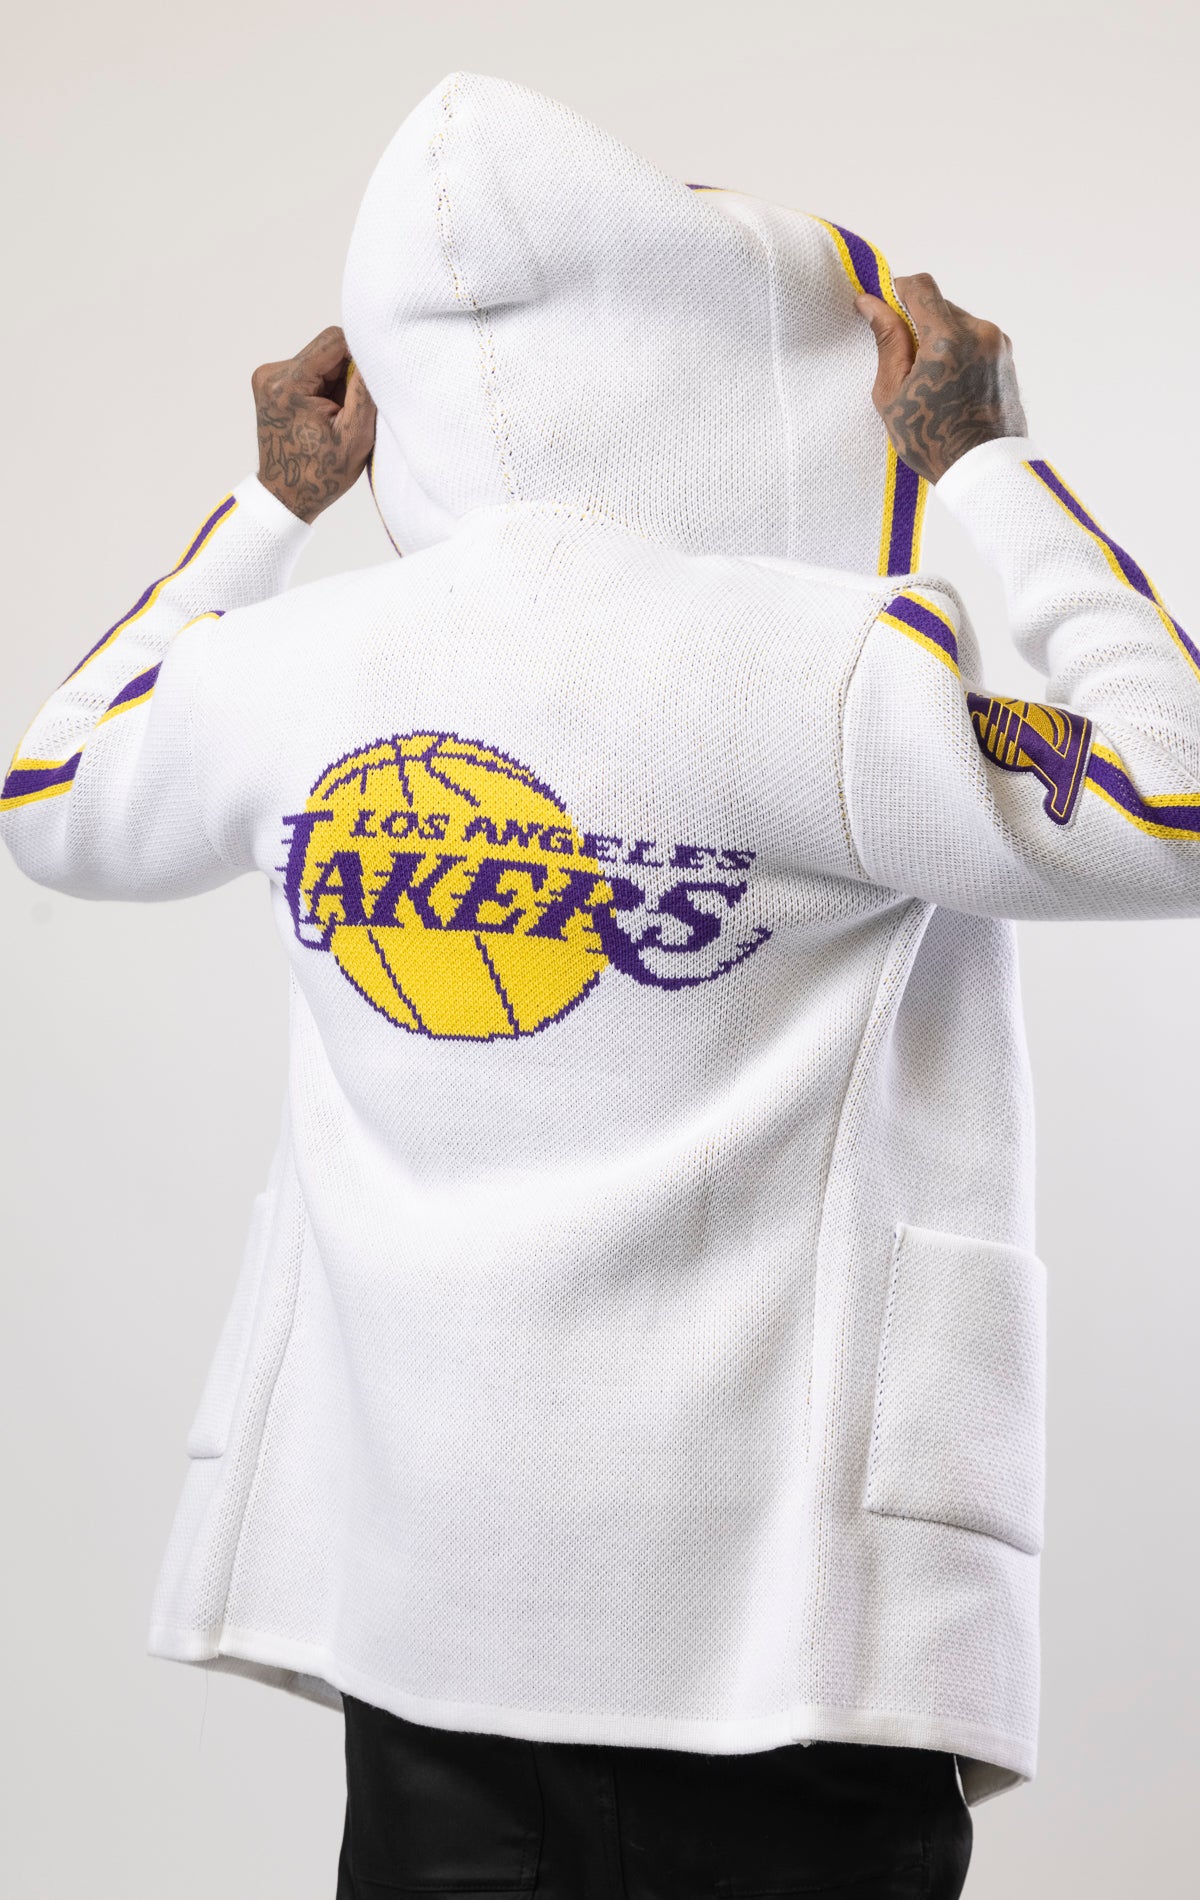 White LA LAKERS Cardigan Sweater. This cozy jacket is designed with a stylish three-quarter length and boasts bold team branding on the front, back, and sleeve. Complete with a full-zip closure, attached hood, and front pockets, this knit sweater offers both comfort and style.